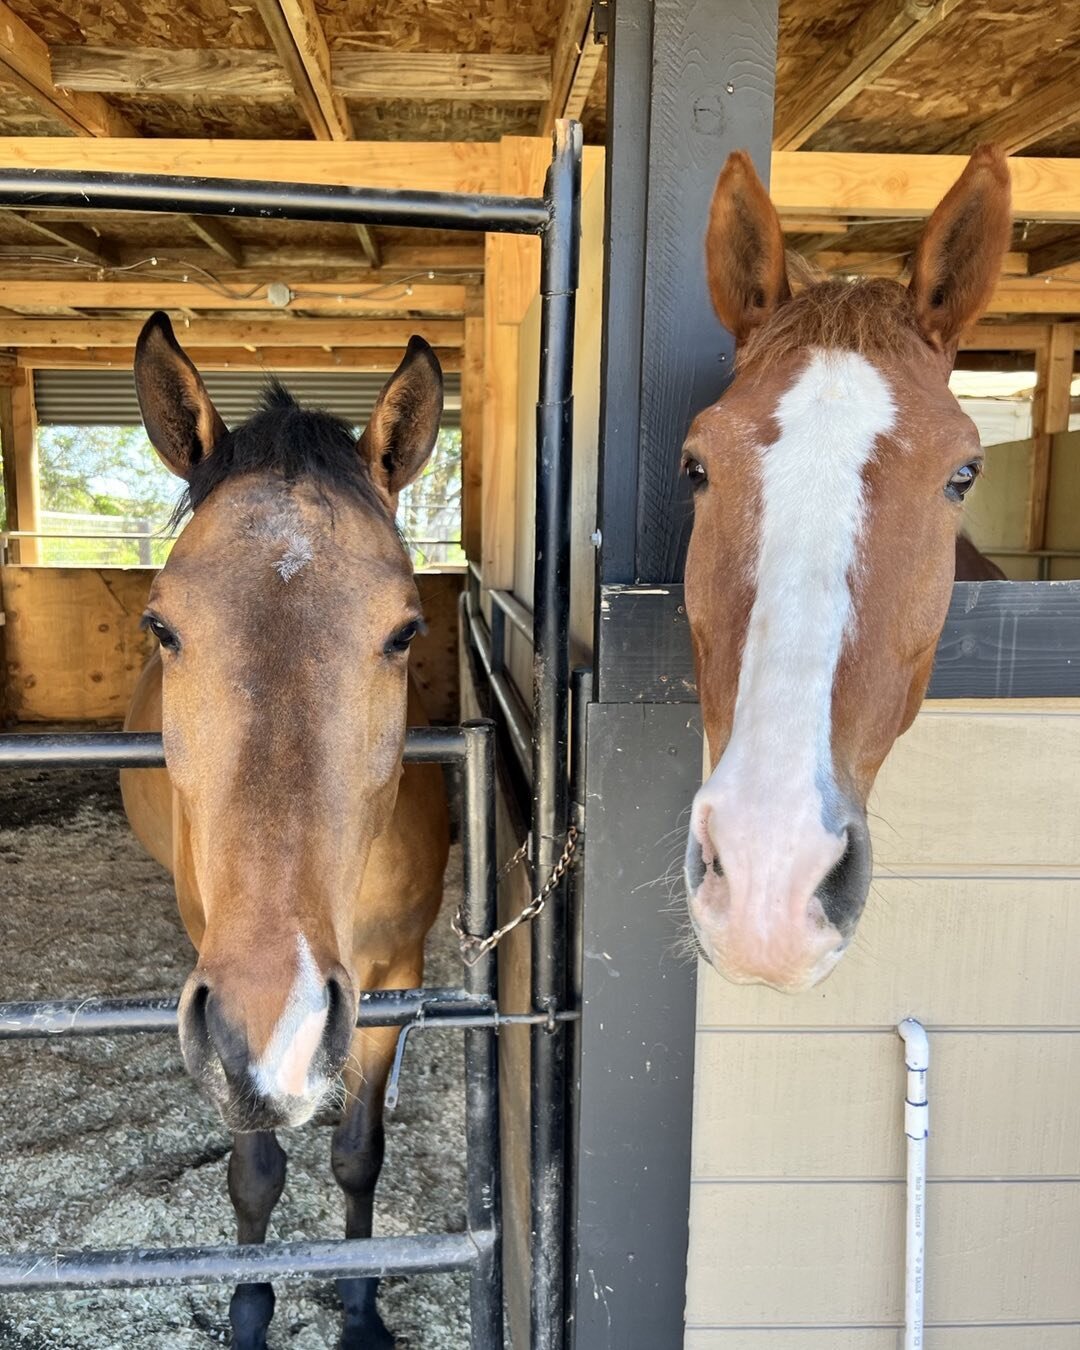 &ldquo;We are really cute and we love our new home .&rdquo;
Love Song and Origi ❤️#silverlinings#happyhorses